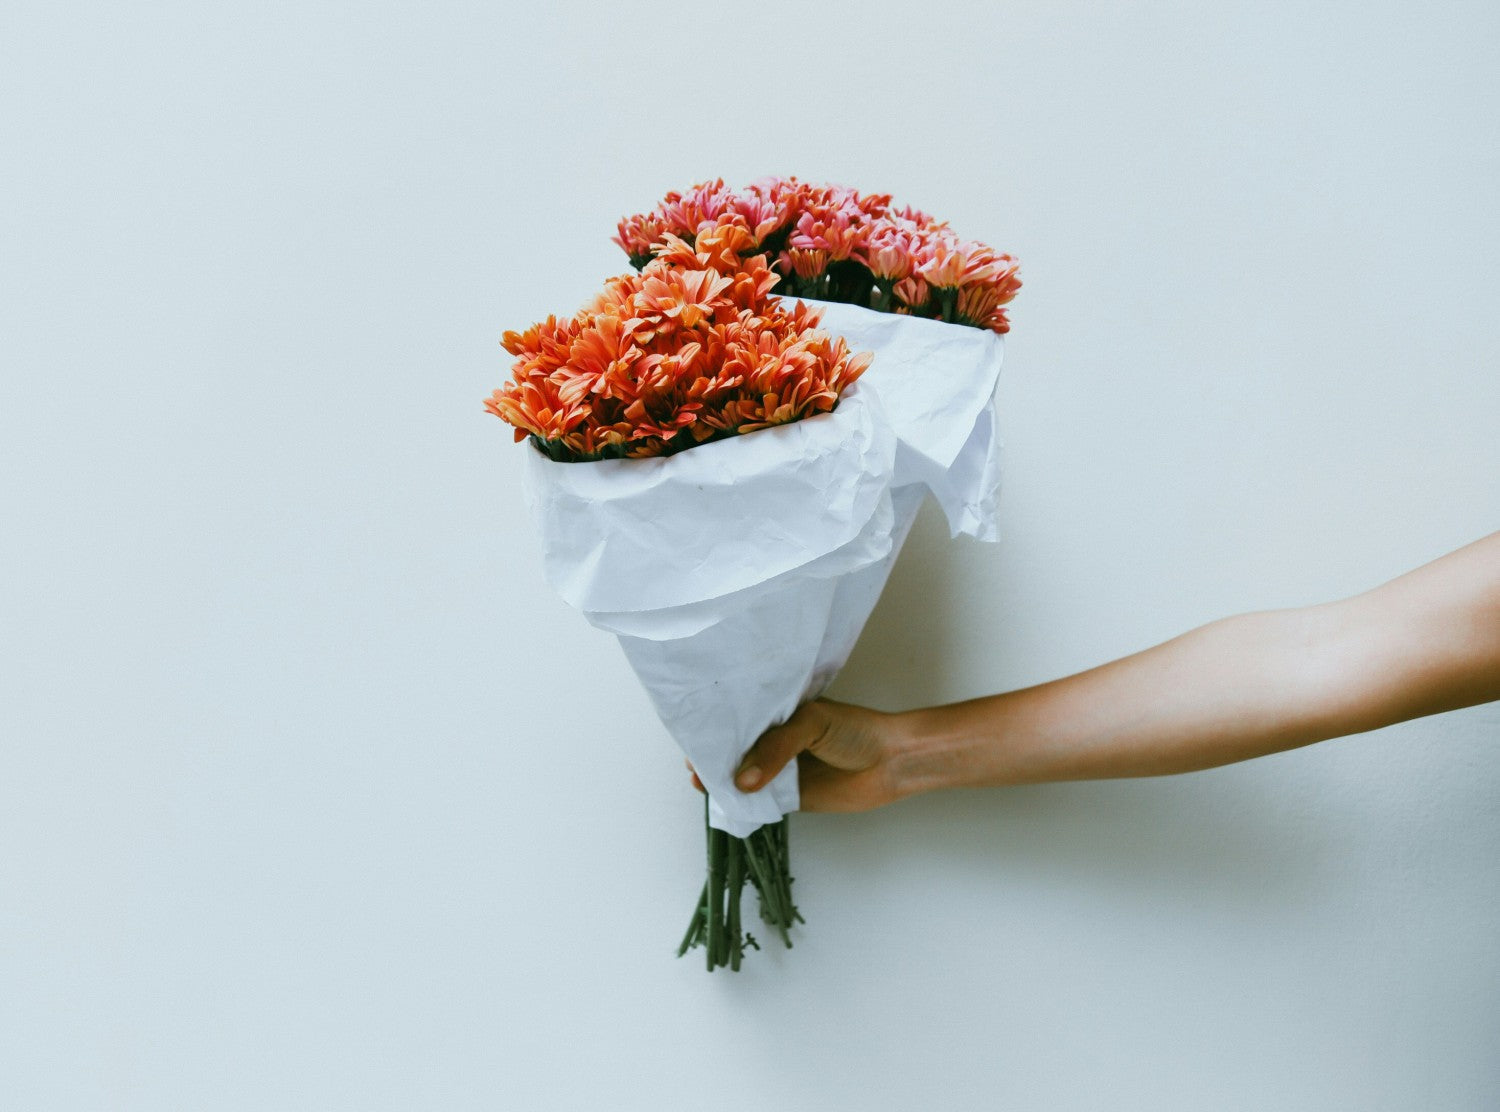 Hand holding two bouquets of flowers